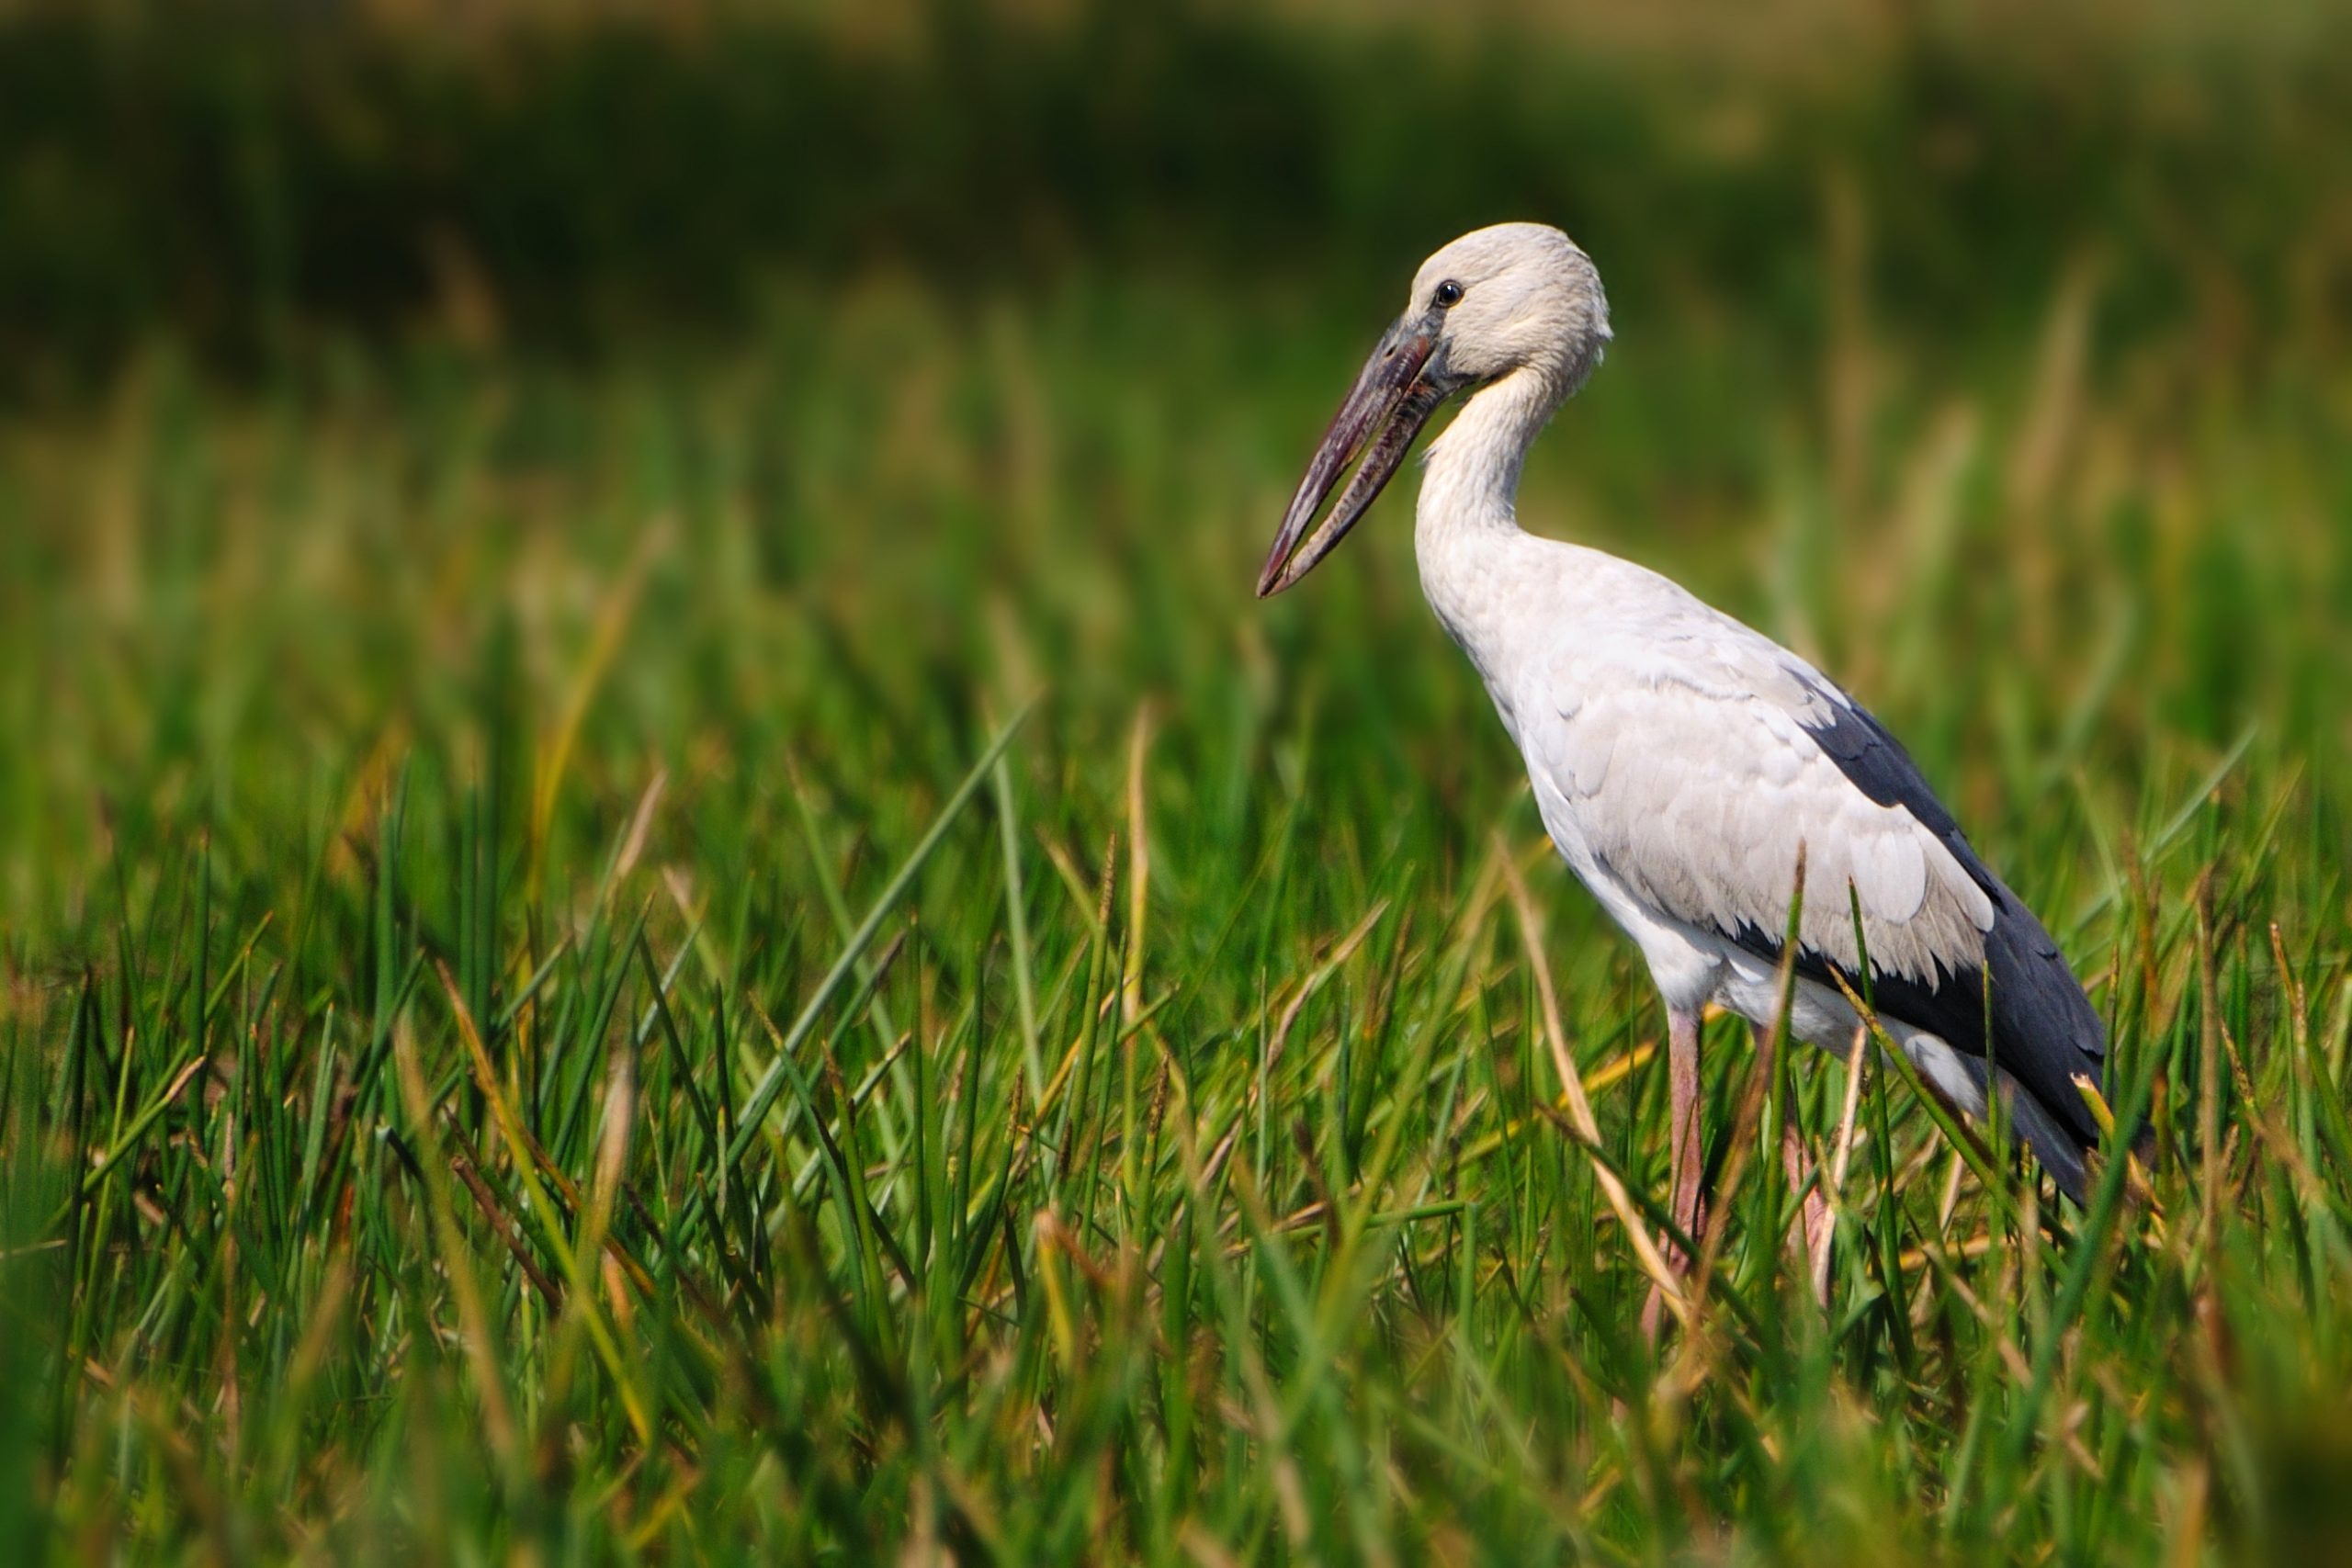 Asian Openbill was among 163 birds spotted by the Restorasi Ekosistem Riau (RER) team during the annual Asian Waterbird Census (AWC) 2021 in the Kampar Peninsula.